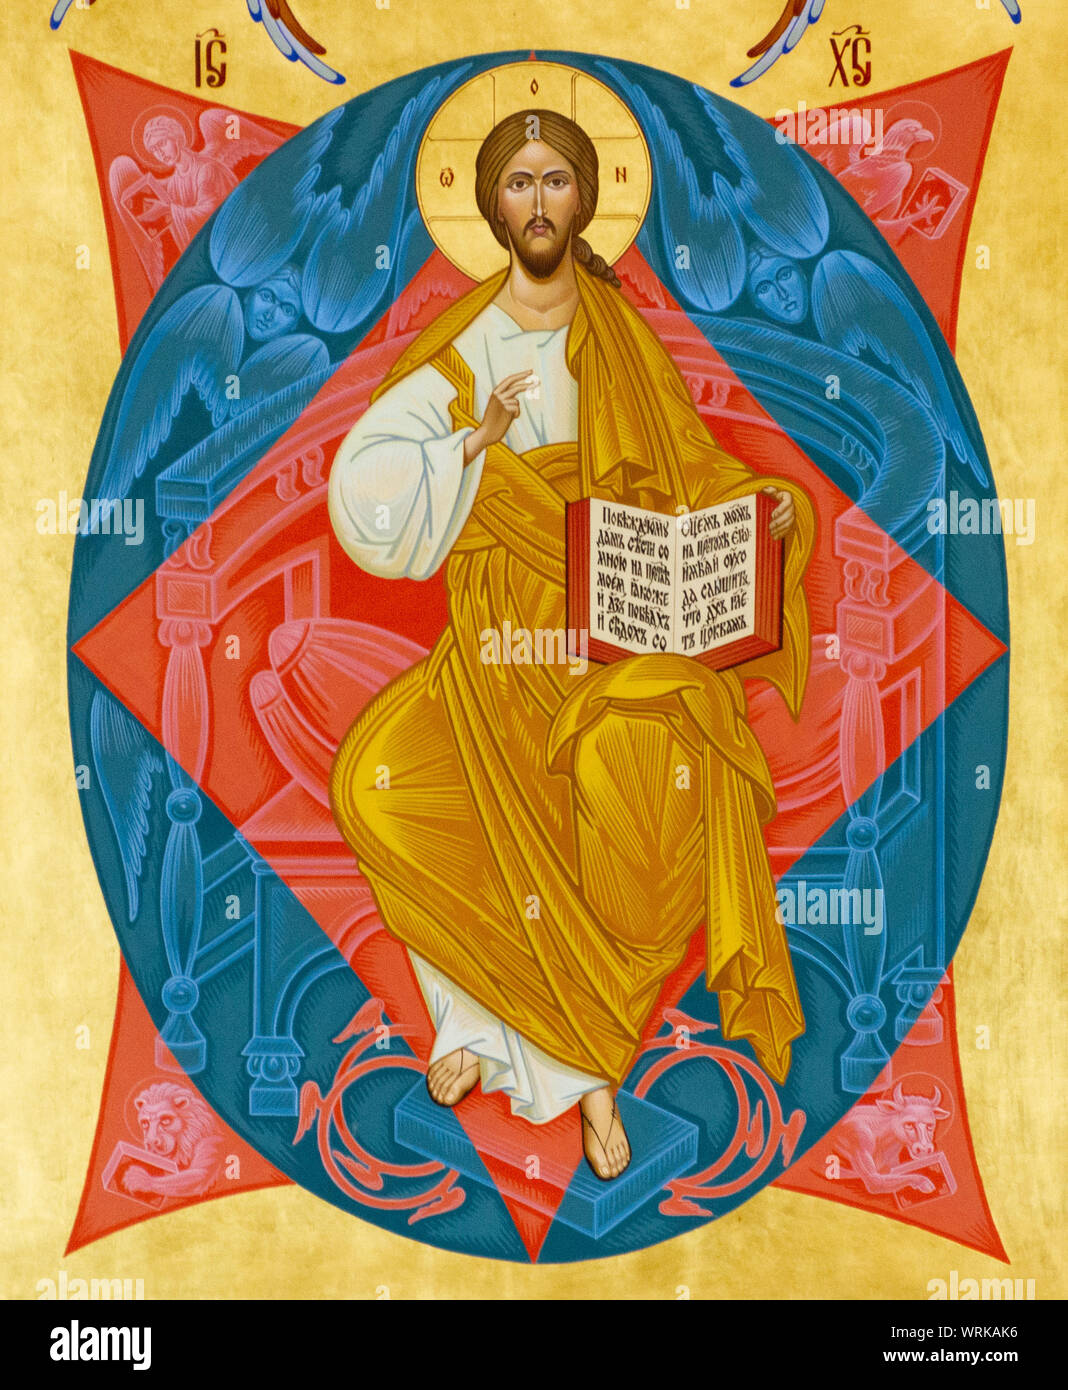 The icon of Christ Pantocrator (Christ in Majesty or Christ Enthroned). Part of the Iconostasis in the Church of Saint Elijah. Stock Photo